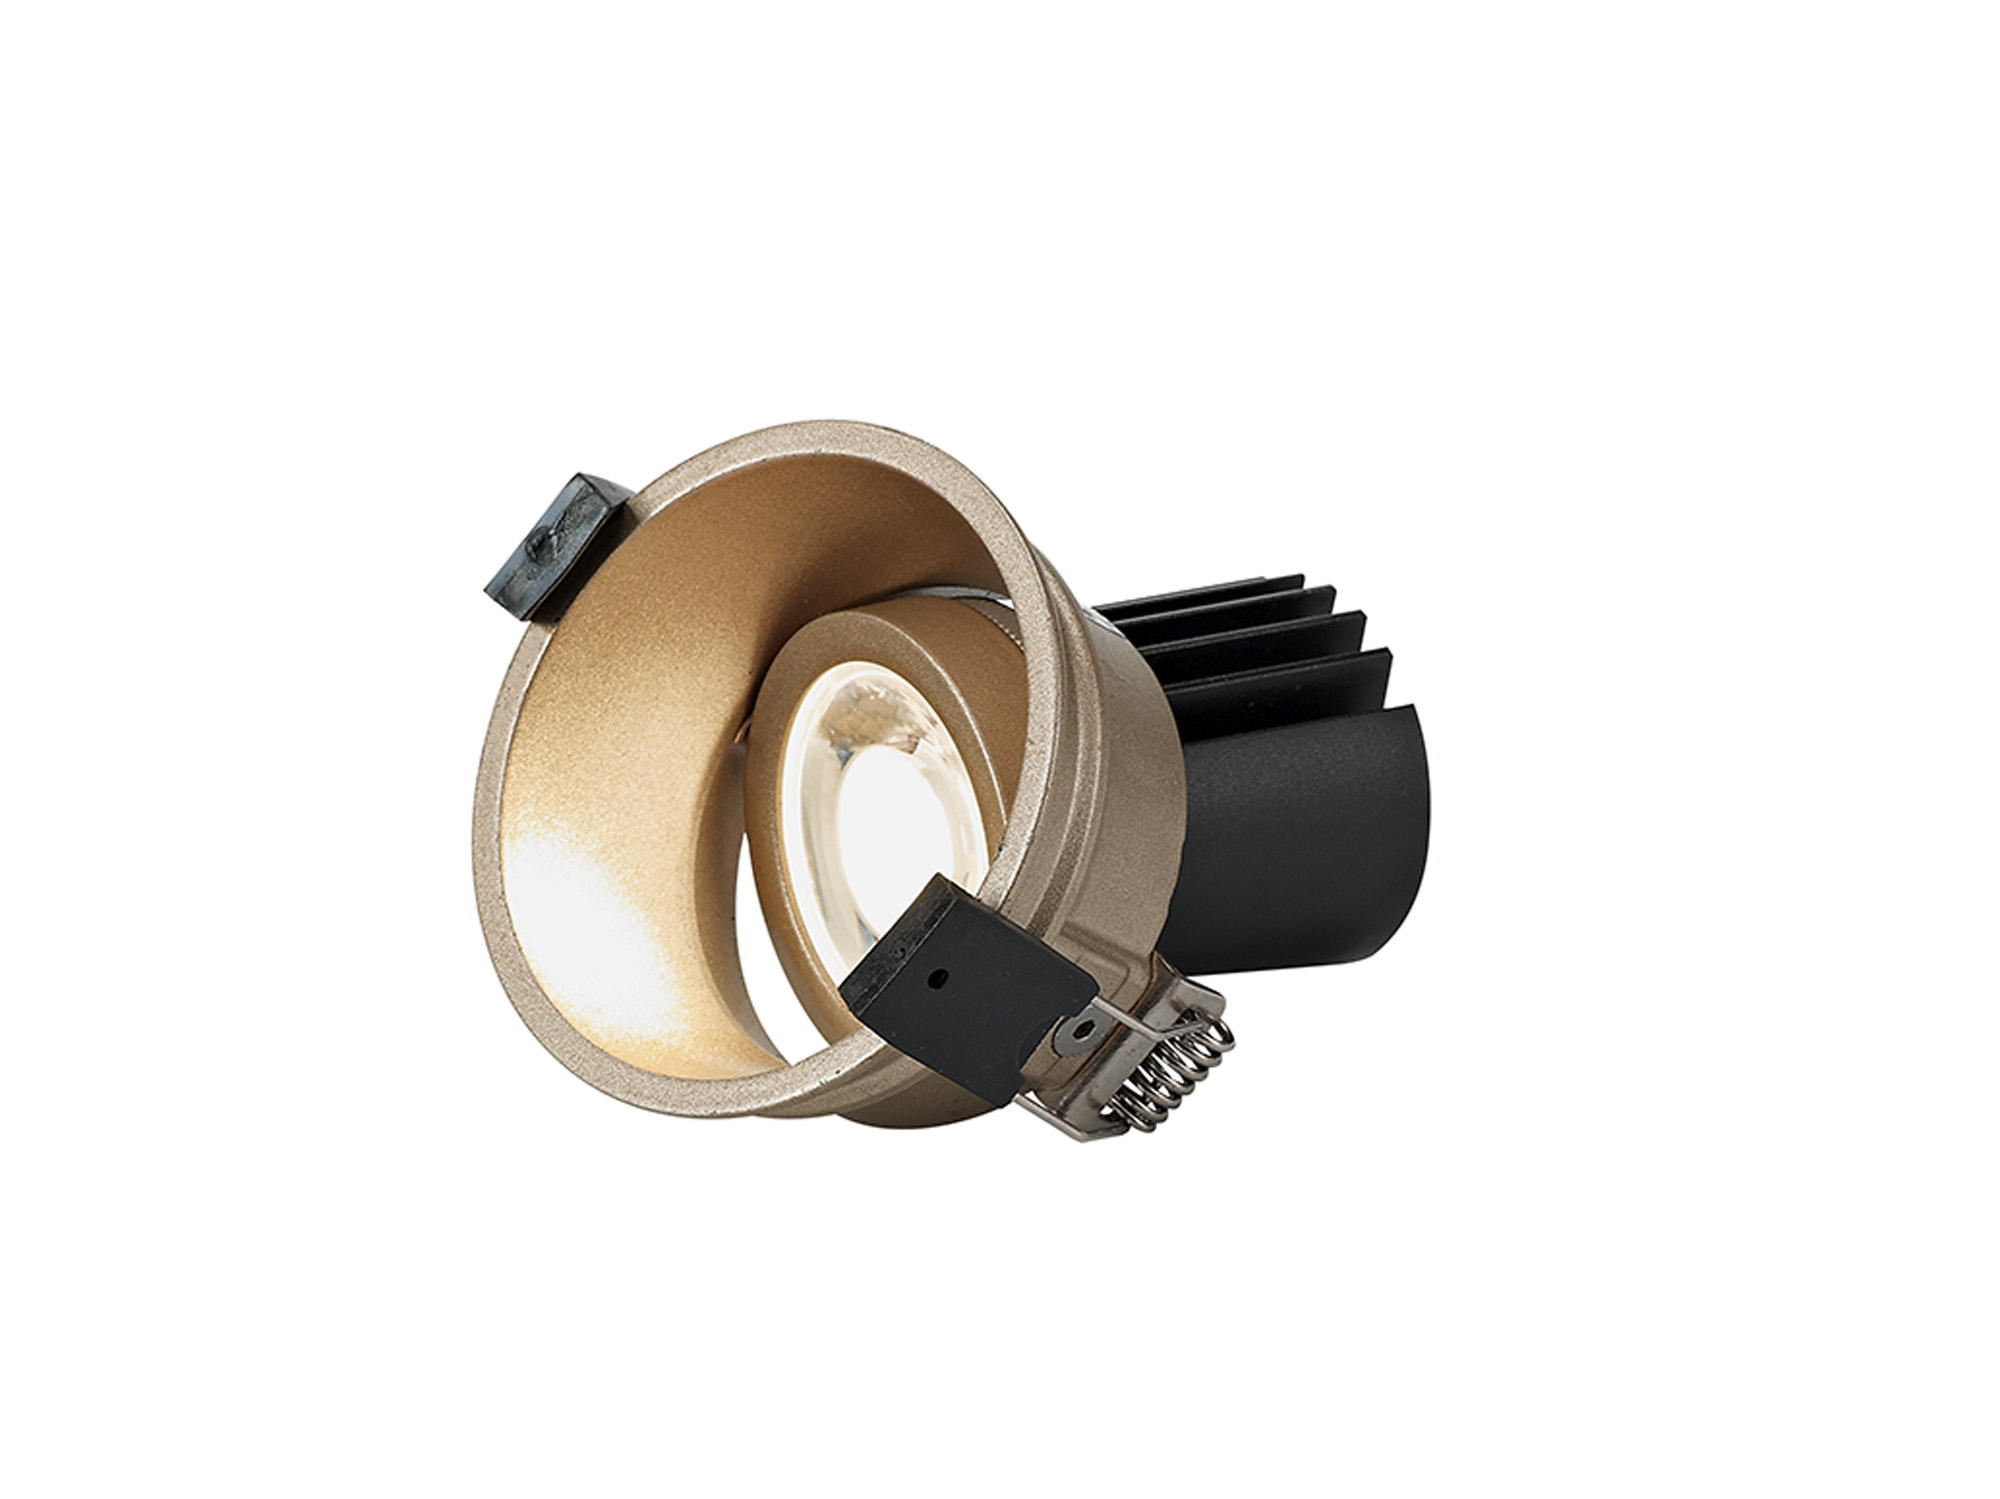 DM201676  Bania A 9 Powered by Tridonic  9W 2700K 770lm 24° CRI>90 LED Engine, 250mA Gold Adjustable Recessed Spotlight, IP20